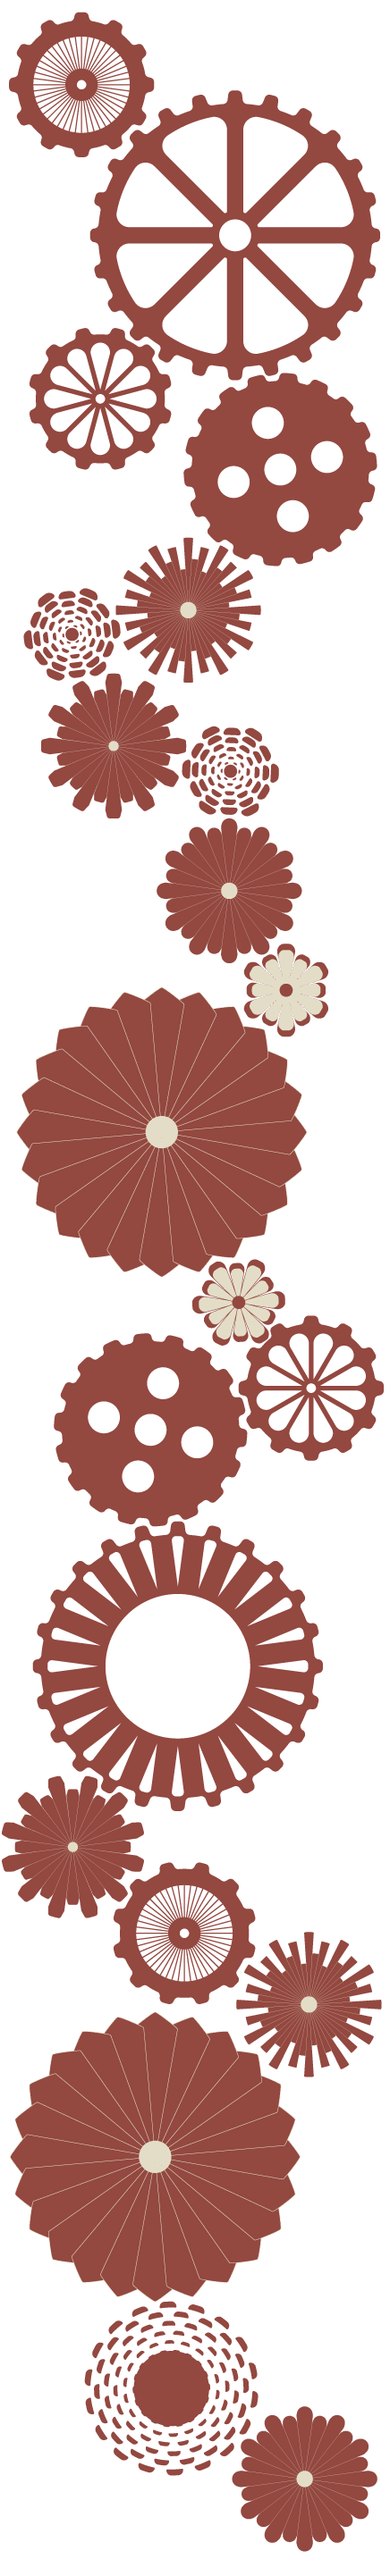 Illustrated cogs that vary in design between more organic and floral and more mechanical